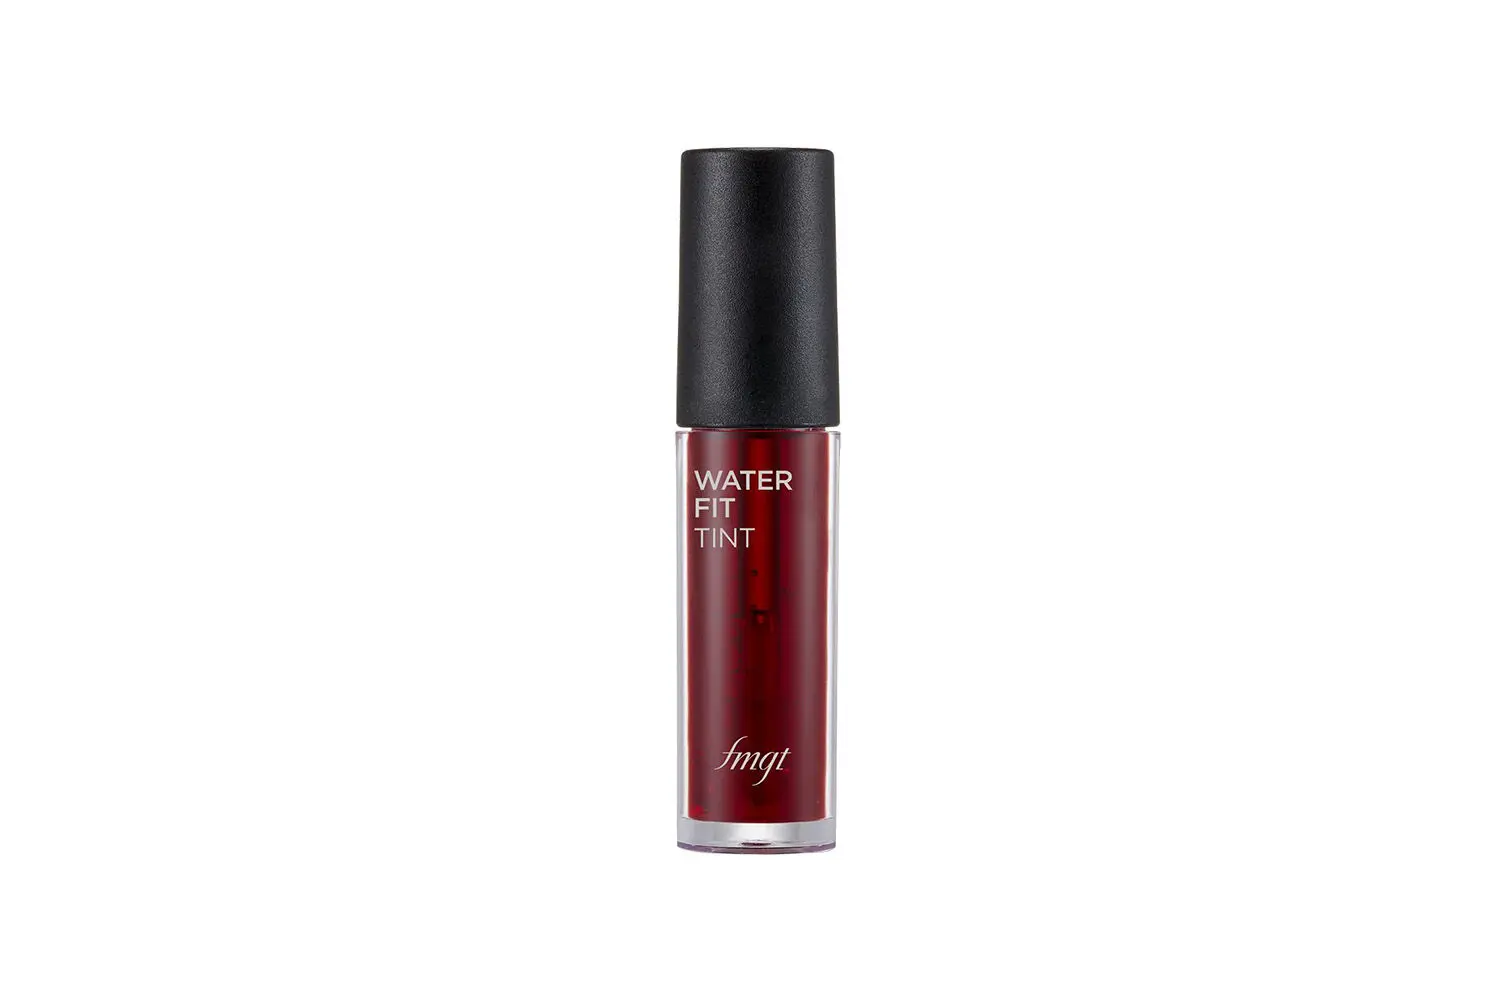 The Face Shop Waterproof and Long Lasting Water Fit Lip Tint, Matte Finish, 5g - Red Signal